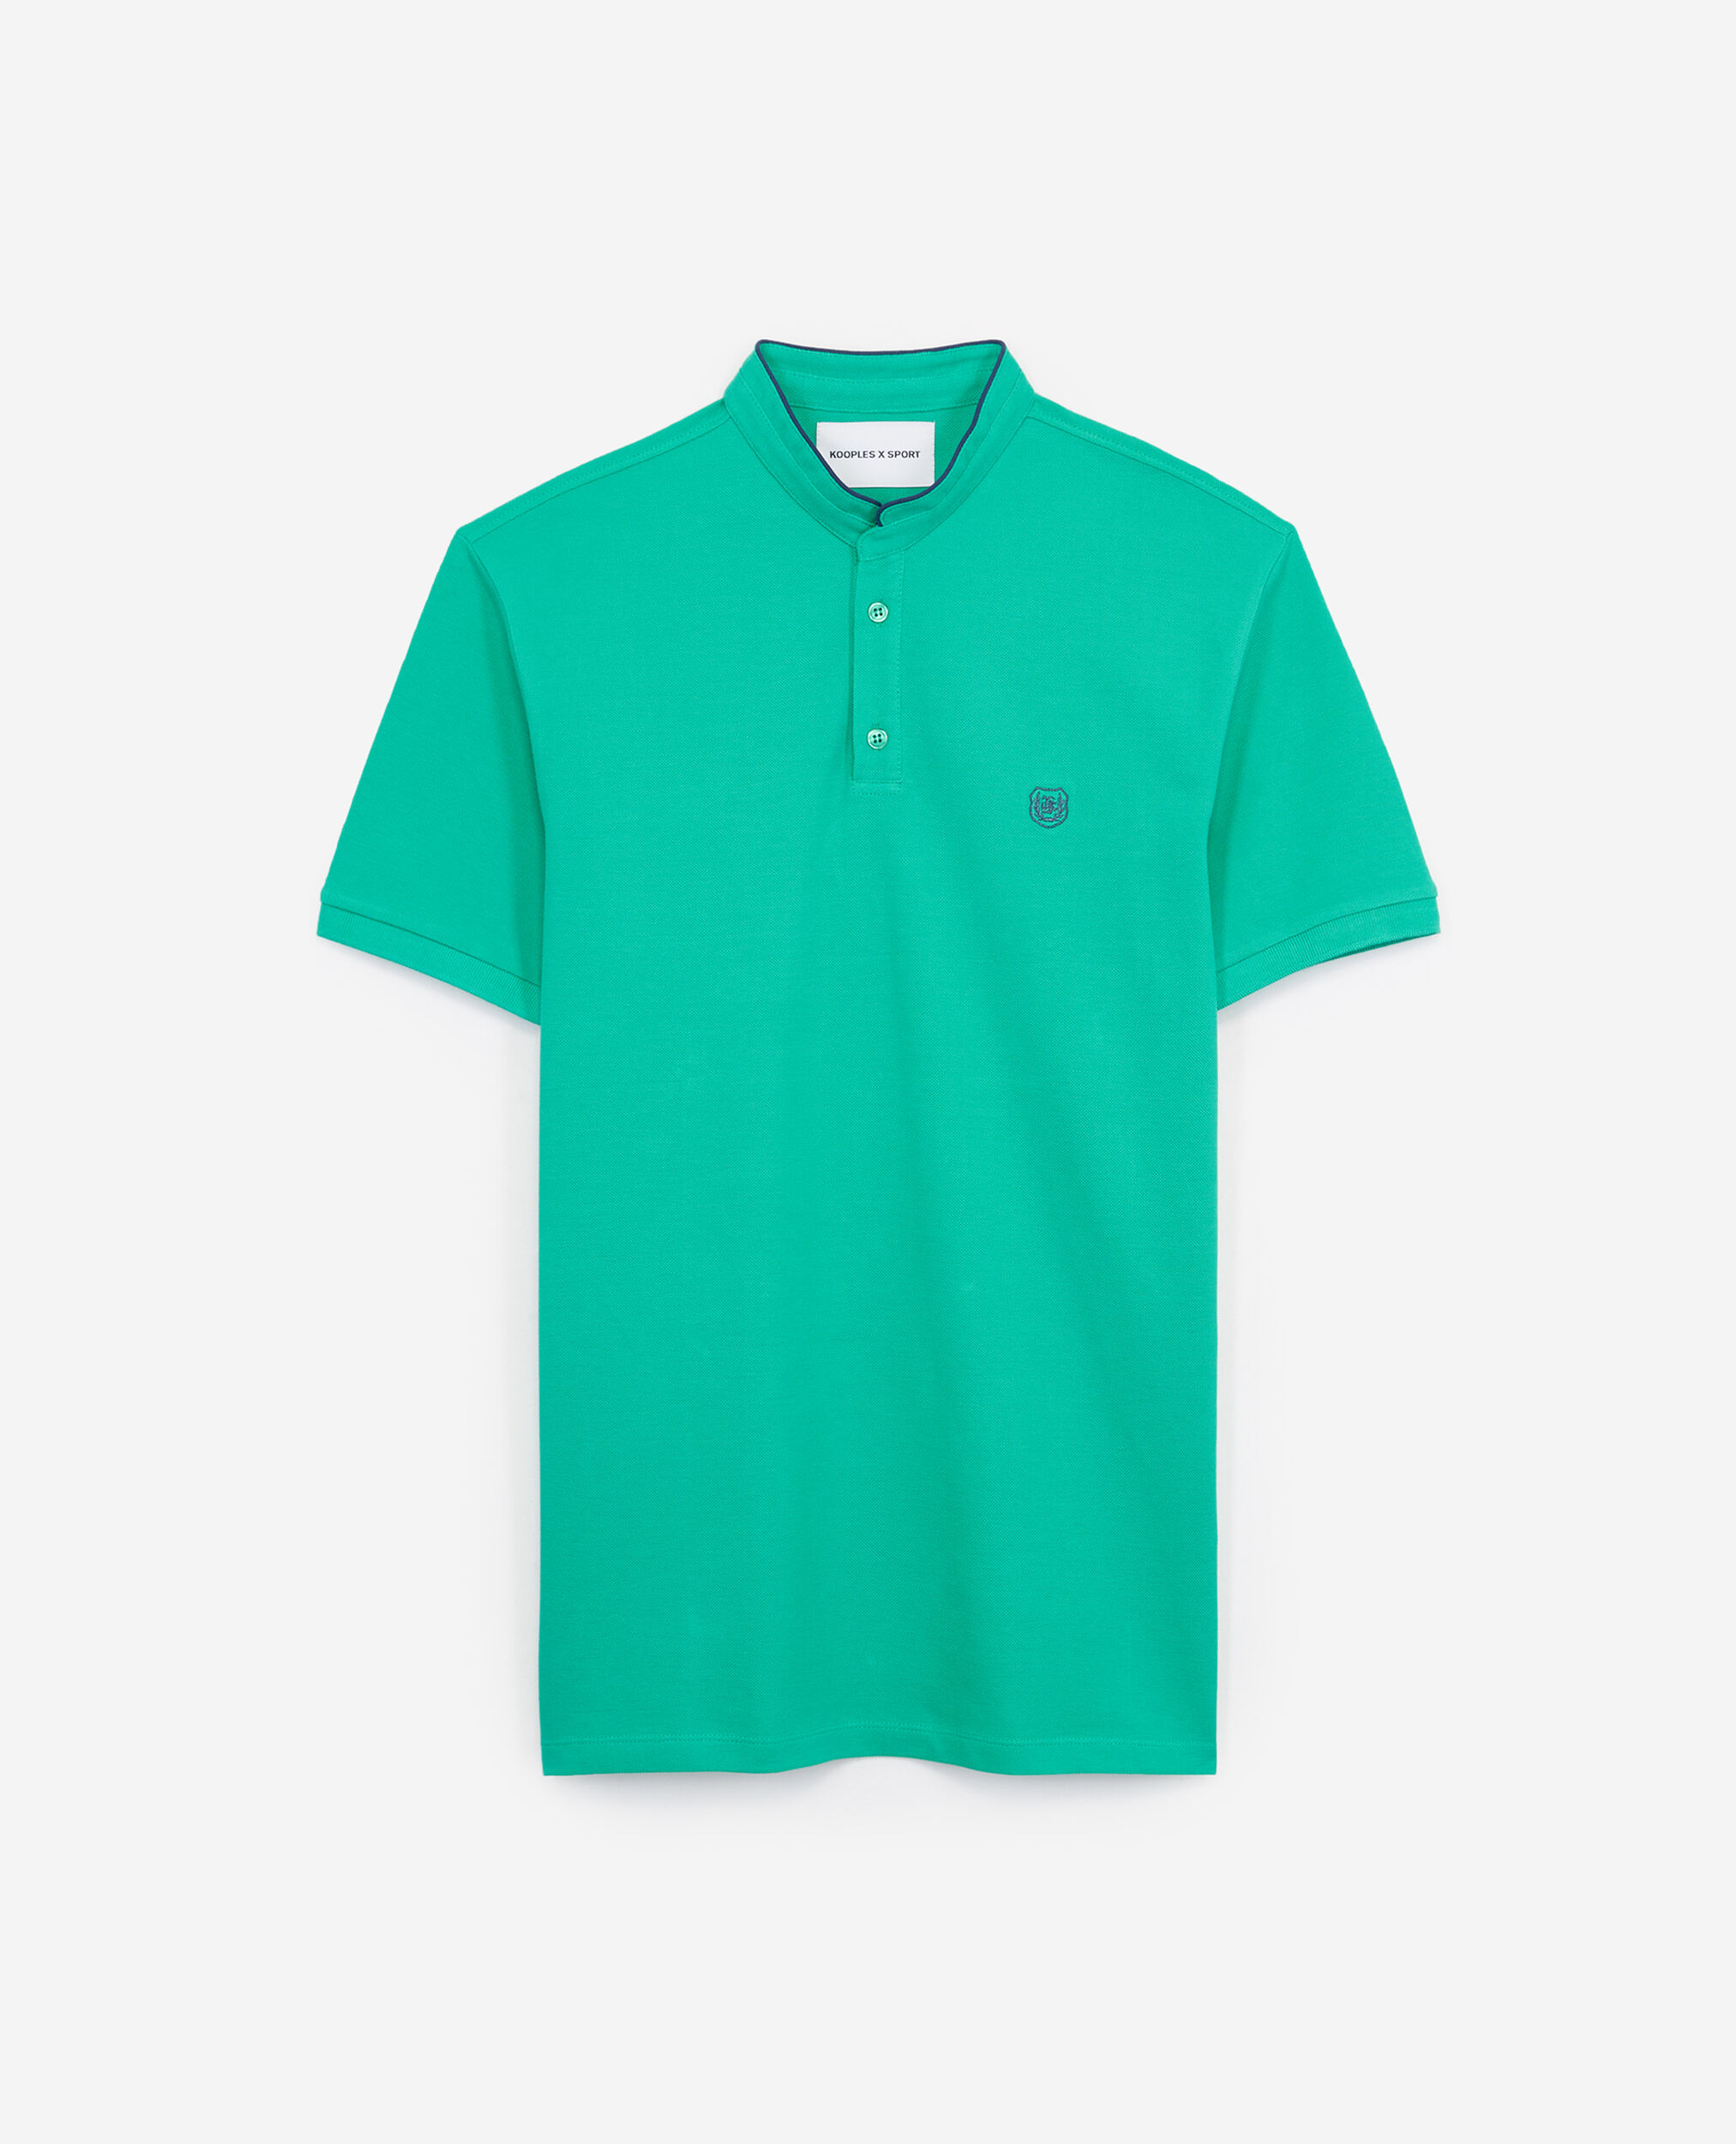 Green cotton polo with blue badge, GREEN VEGETAL / DEEP SEA, hi-res image number null